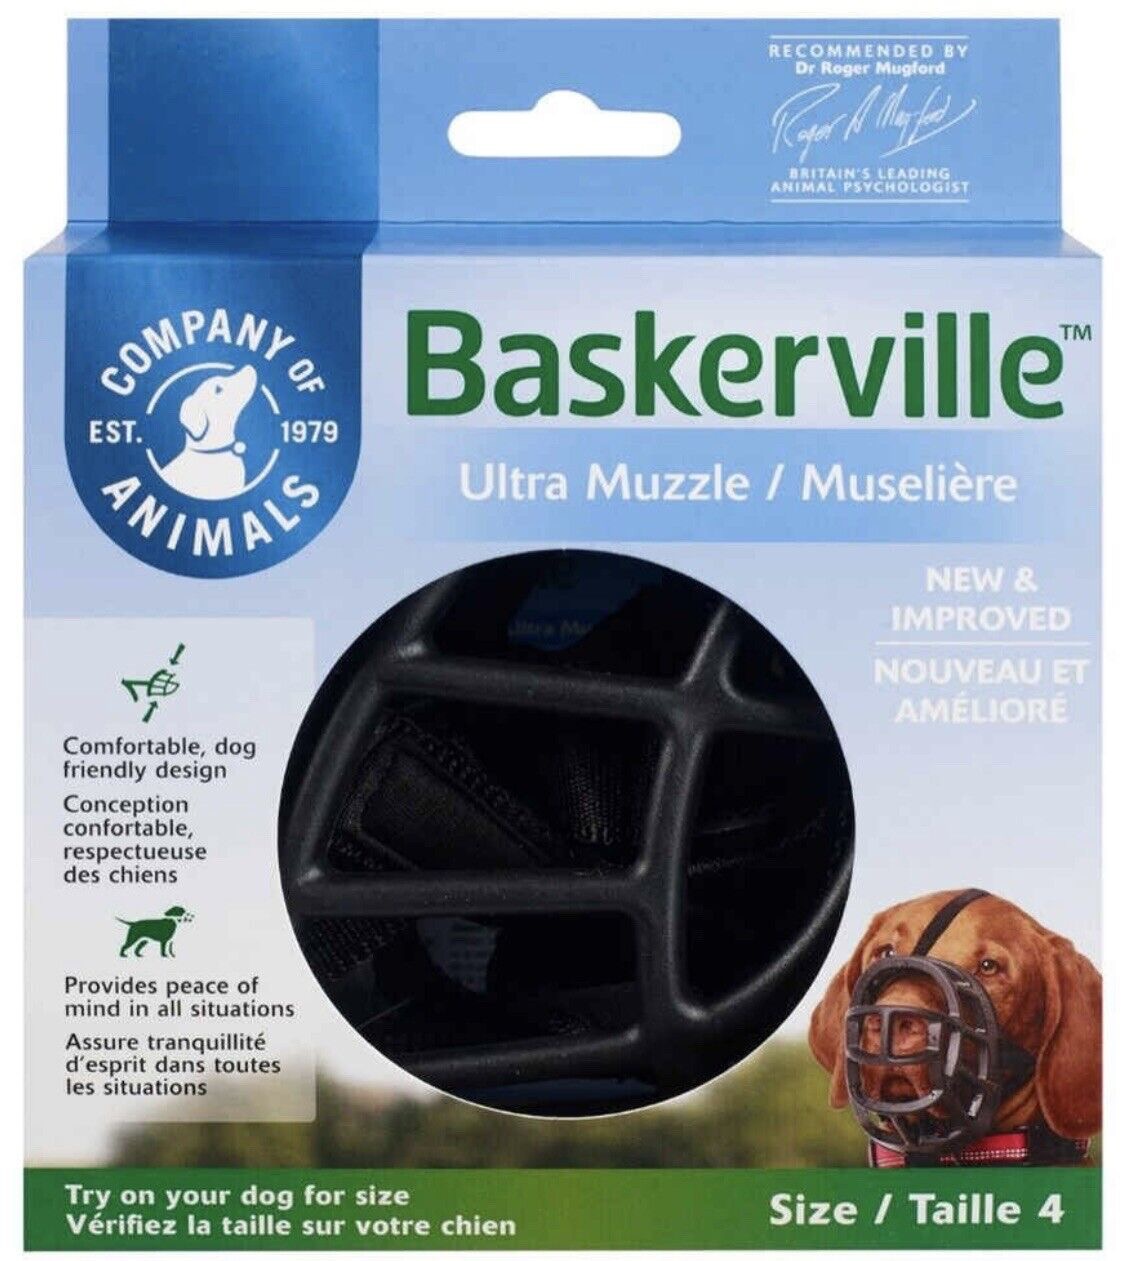 Baskerville Ultra Muzzle For Dogs Size 4 (40-65 LBS) Ultra Comfort